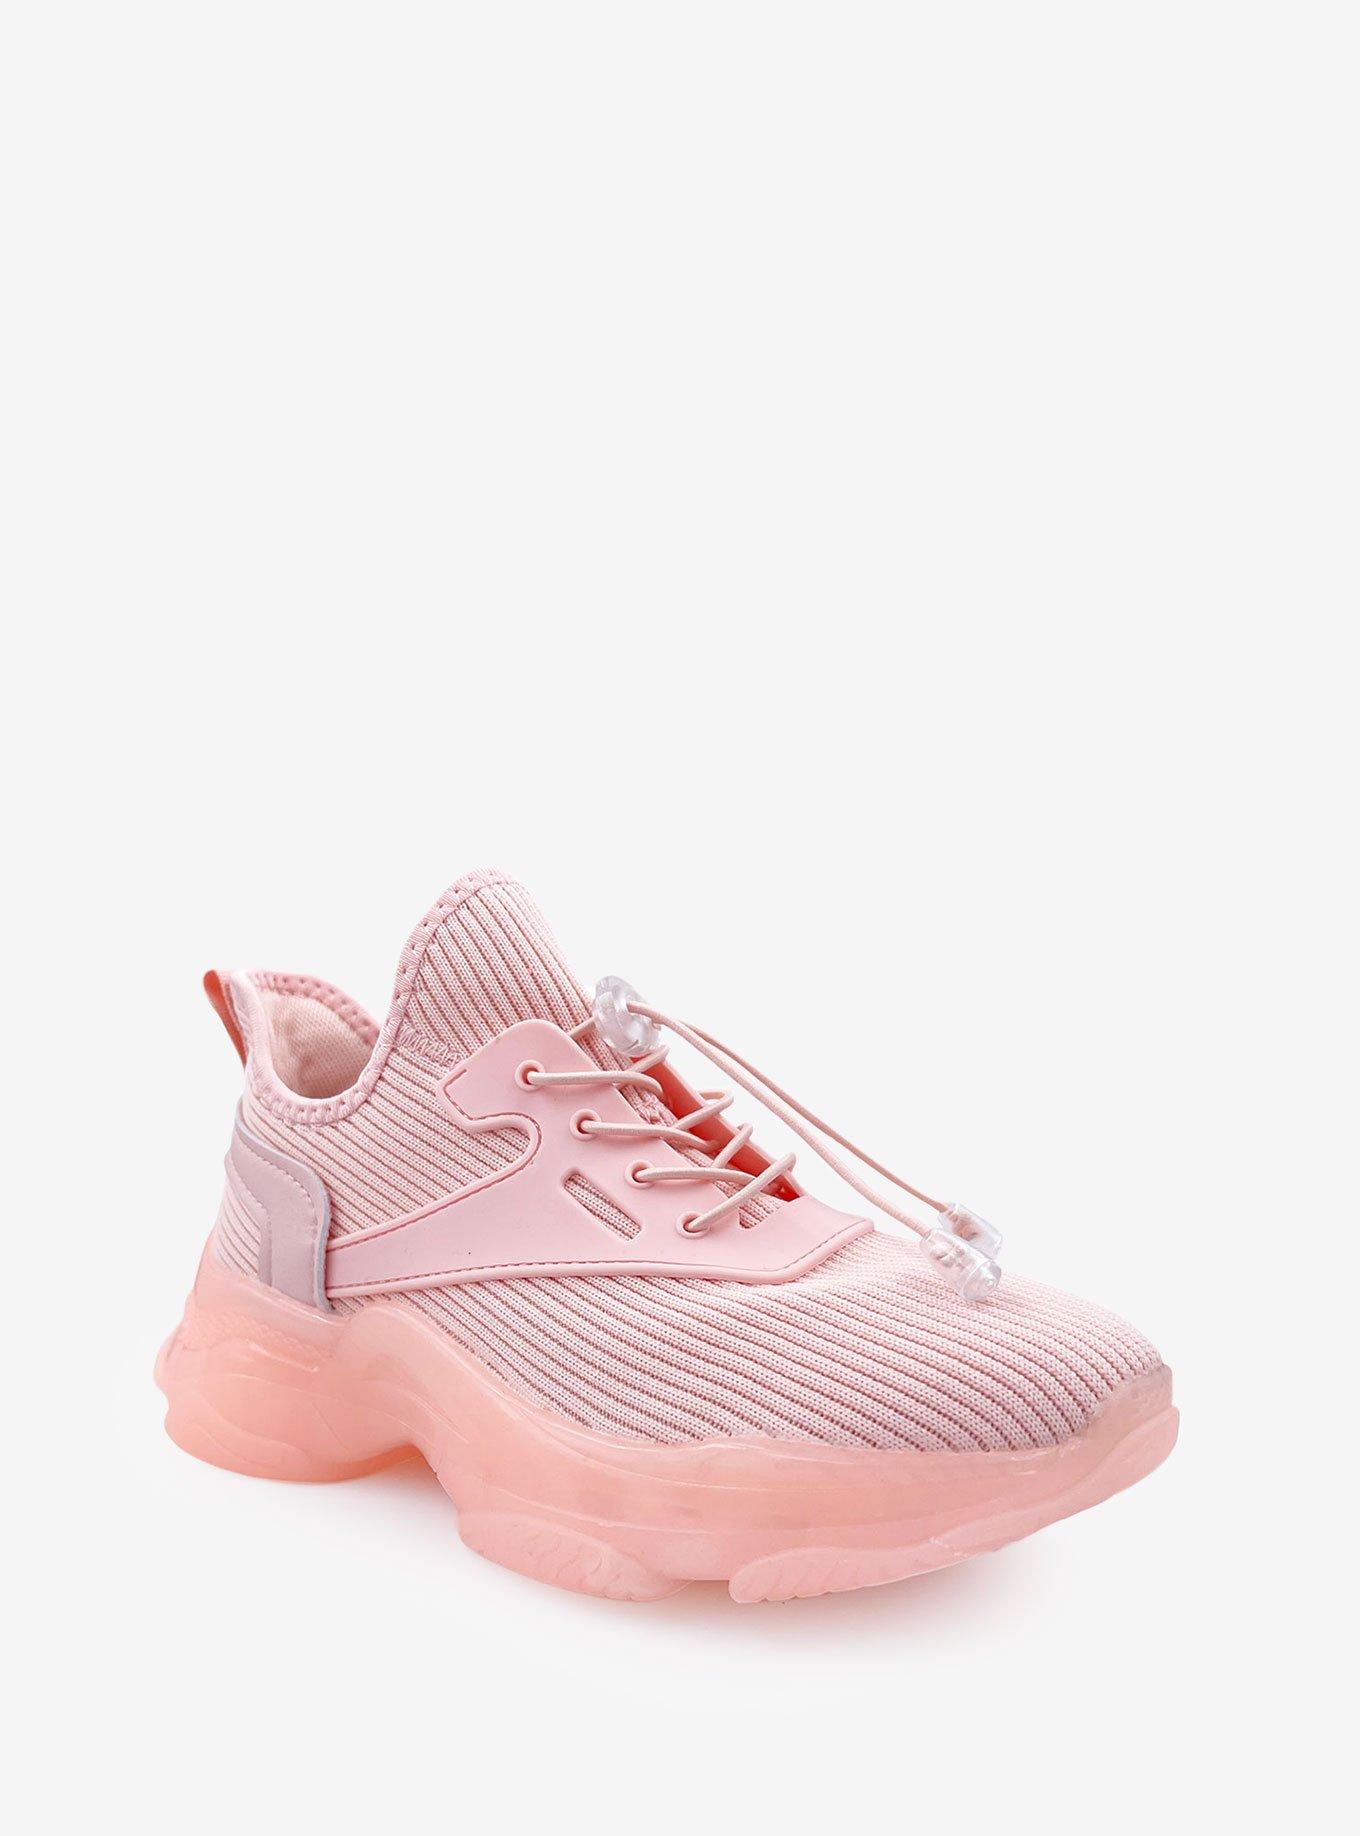 Sloan Knit Upper Sneaker with Chunky Bottom Pink, PINK, hi-res